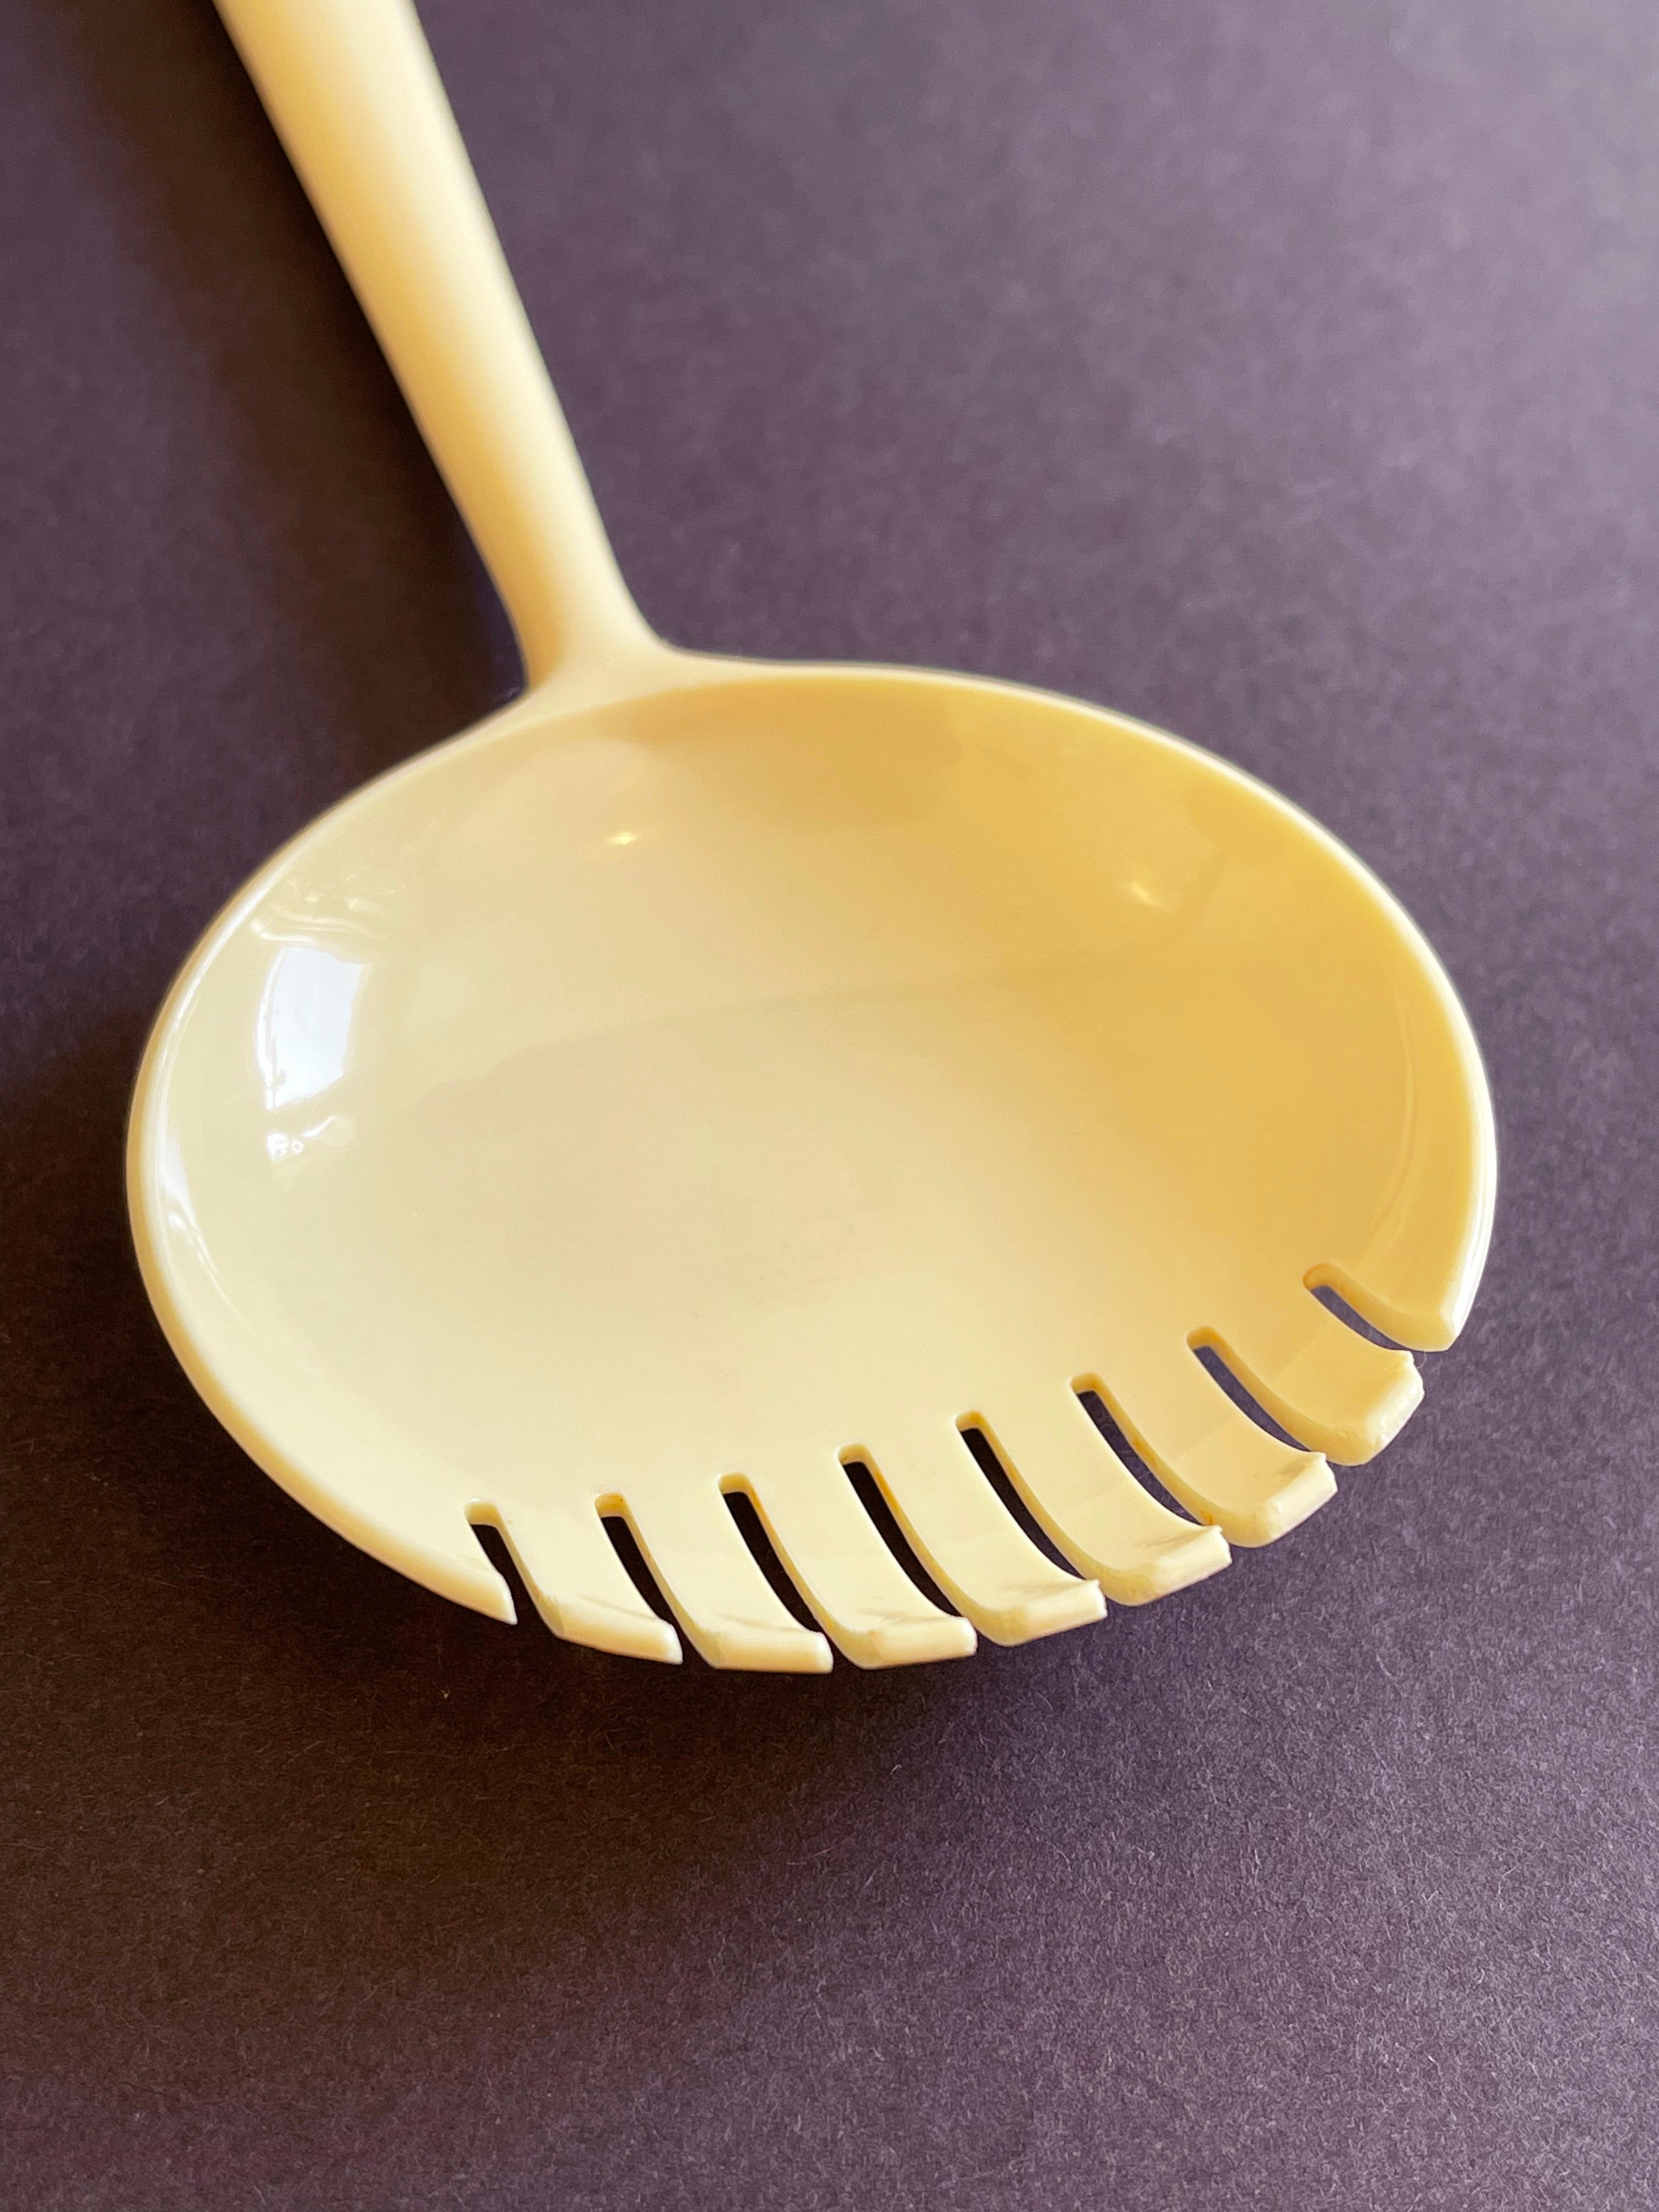 Italian Kartell Salad Spoon & Fork Casalinghi, 1958 Design, Gino Colombini, Milan, Italy For Sale